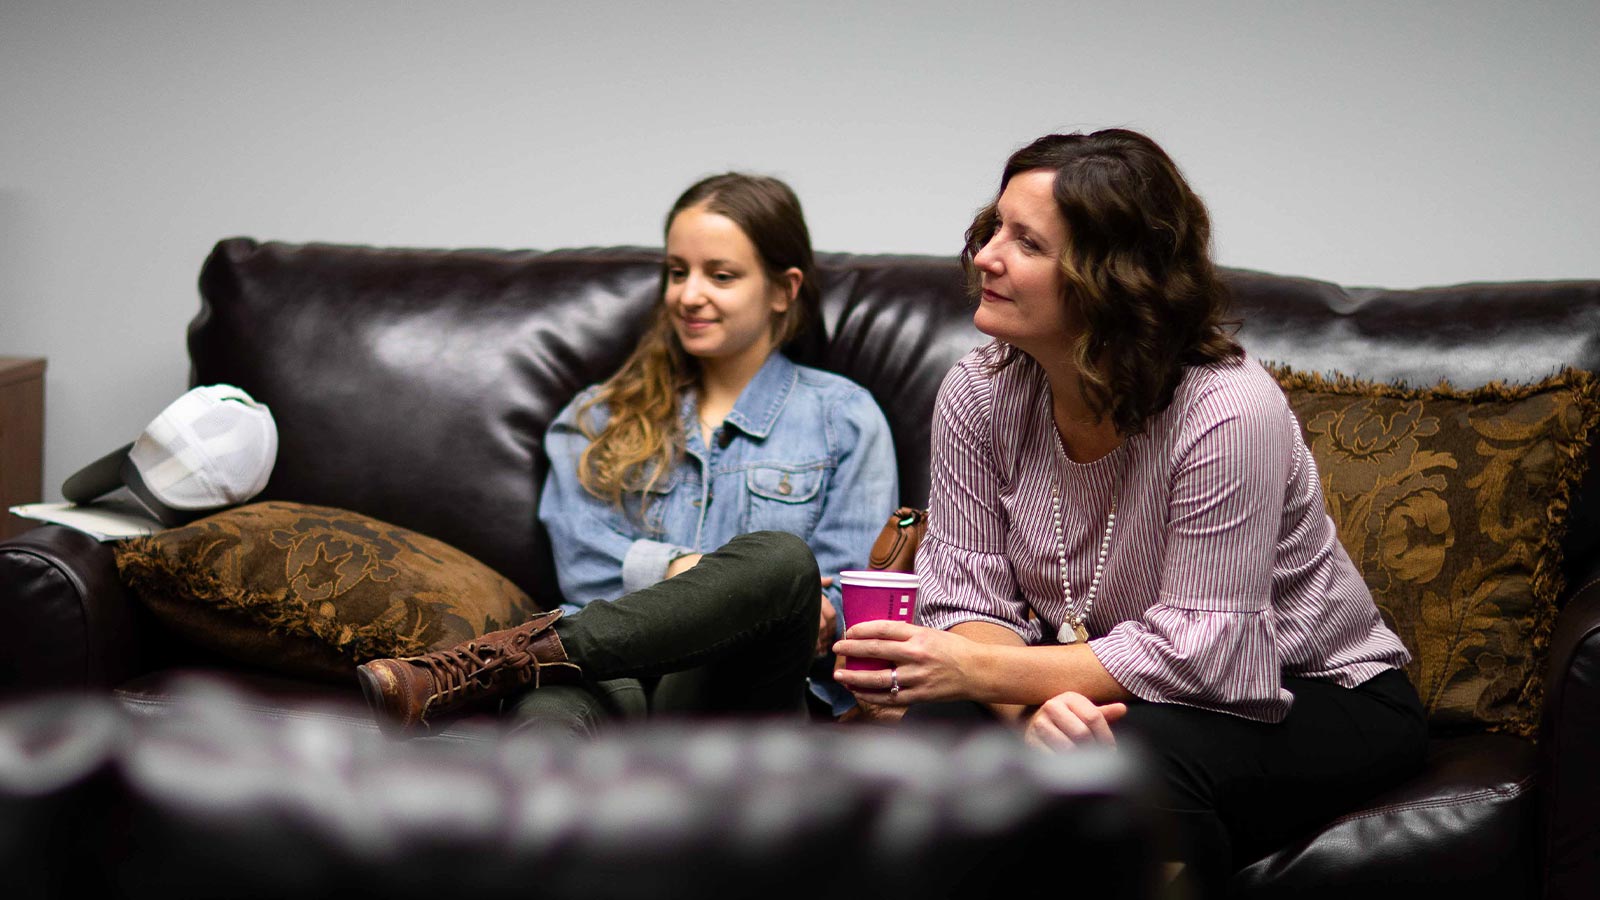 Two women conversing comfortably on a leather couch.